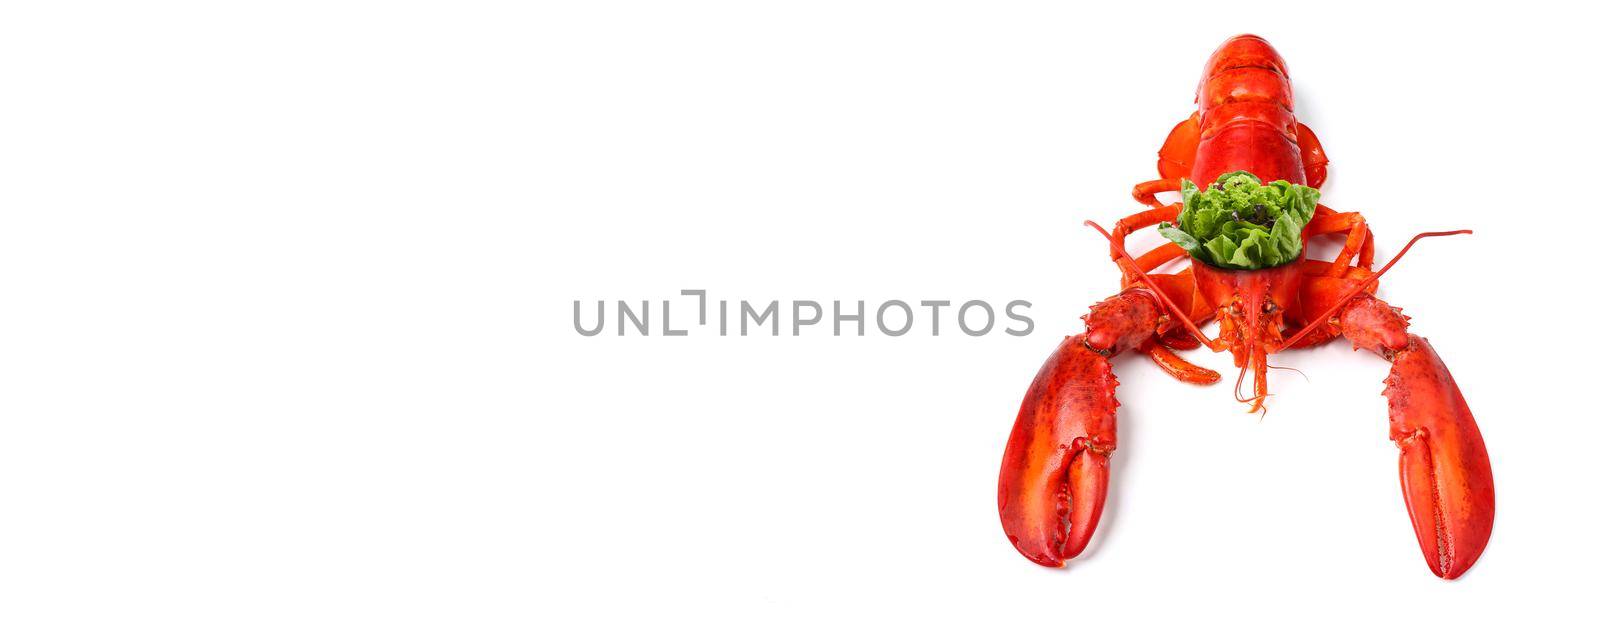 King of lobster with vegetable crown isolated on white background